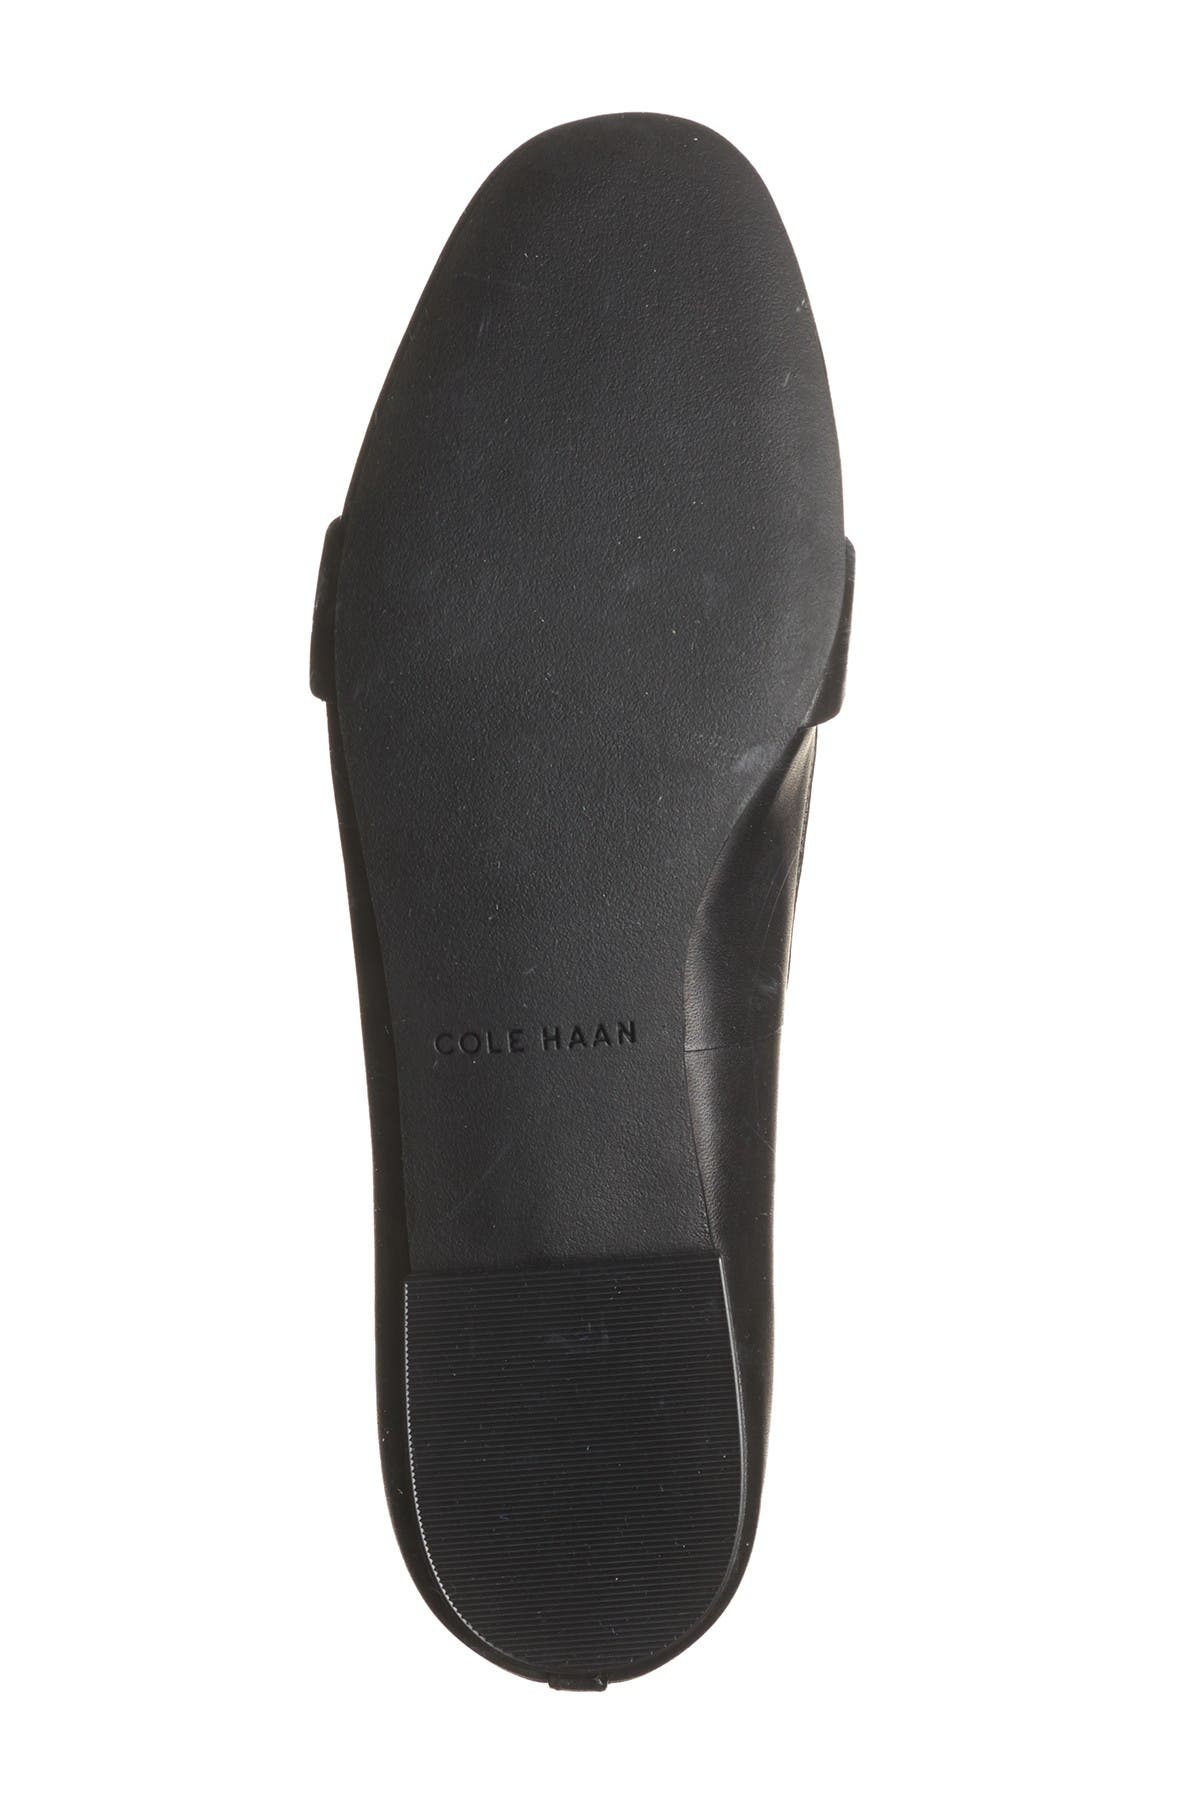 cole haan emory smoking loafer